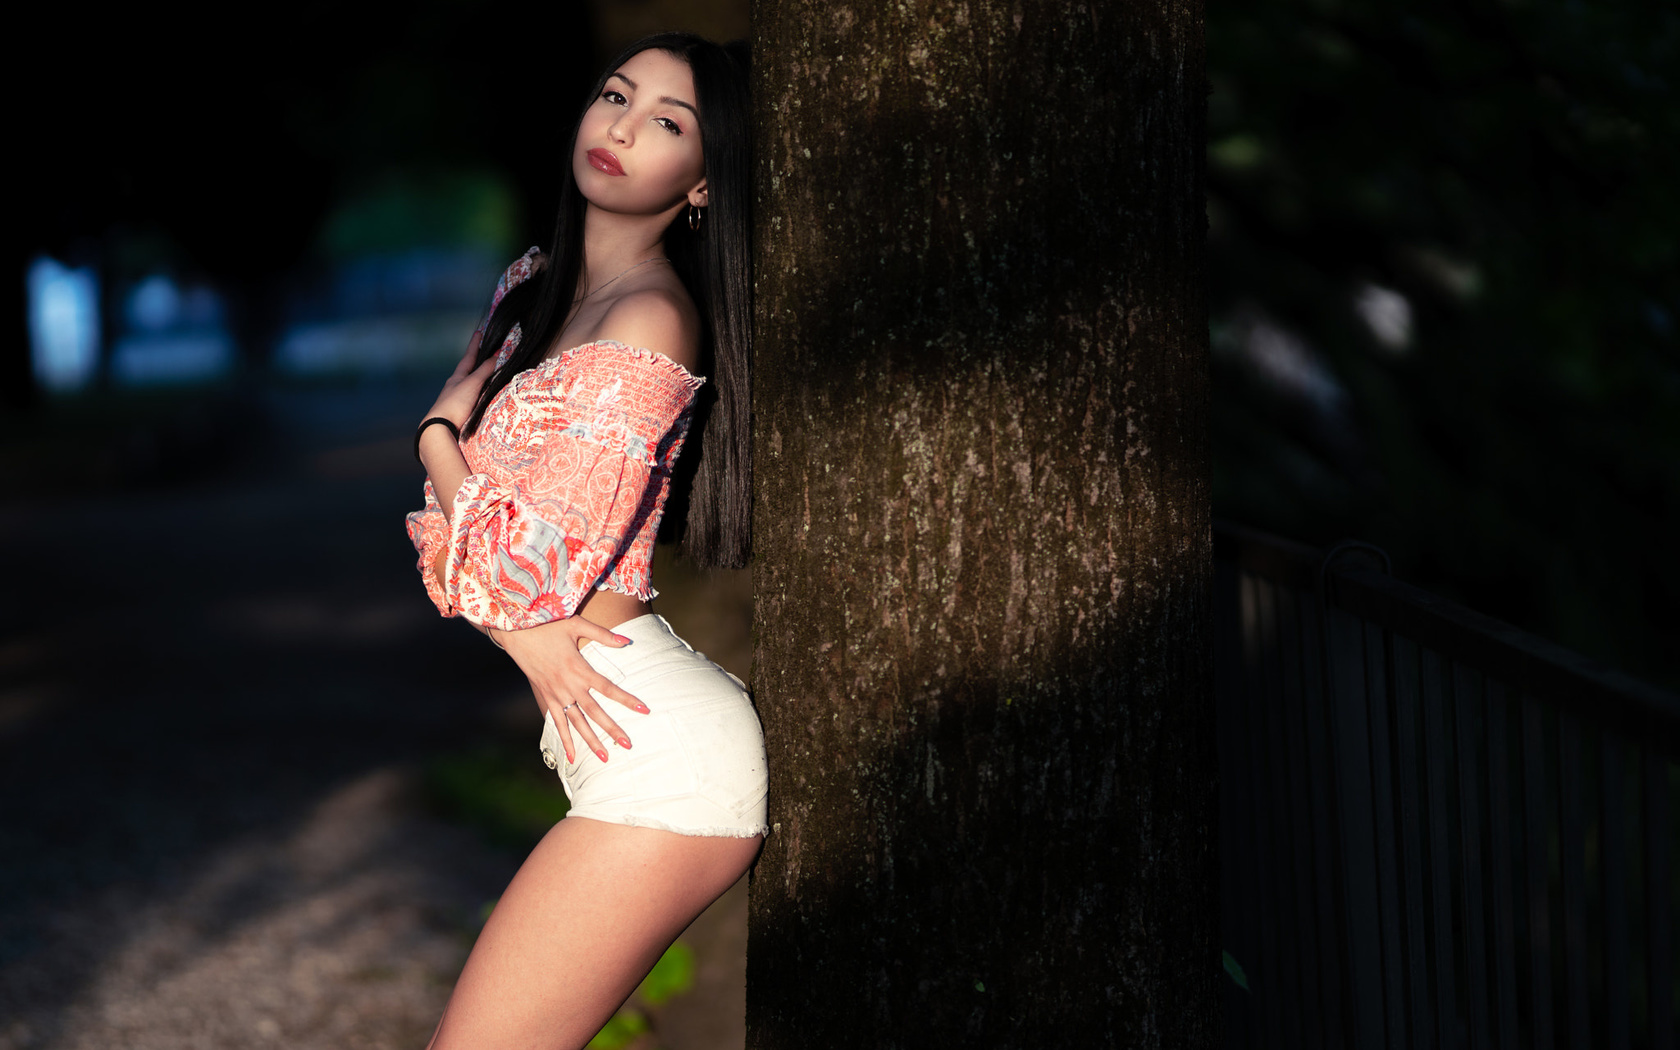 women, marco squassina, jean shorts, straight hair, trees, bare shoulders, ass, pink nails, portrait